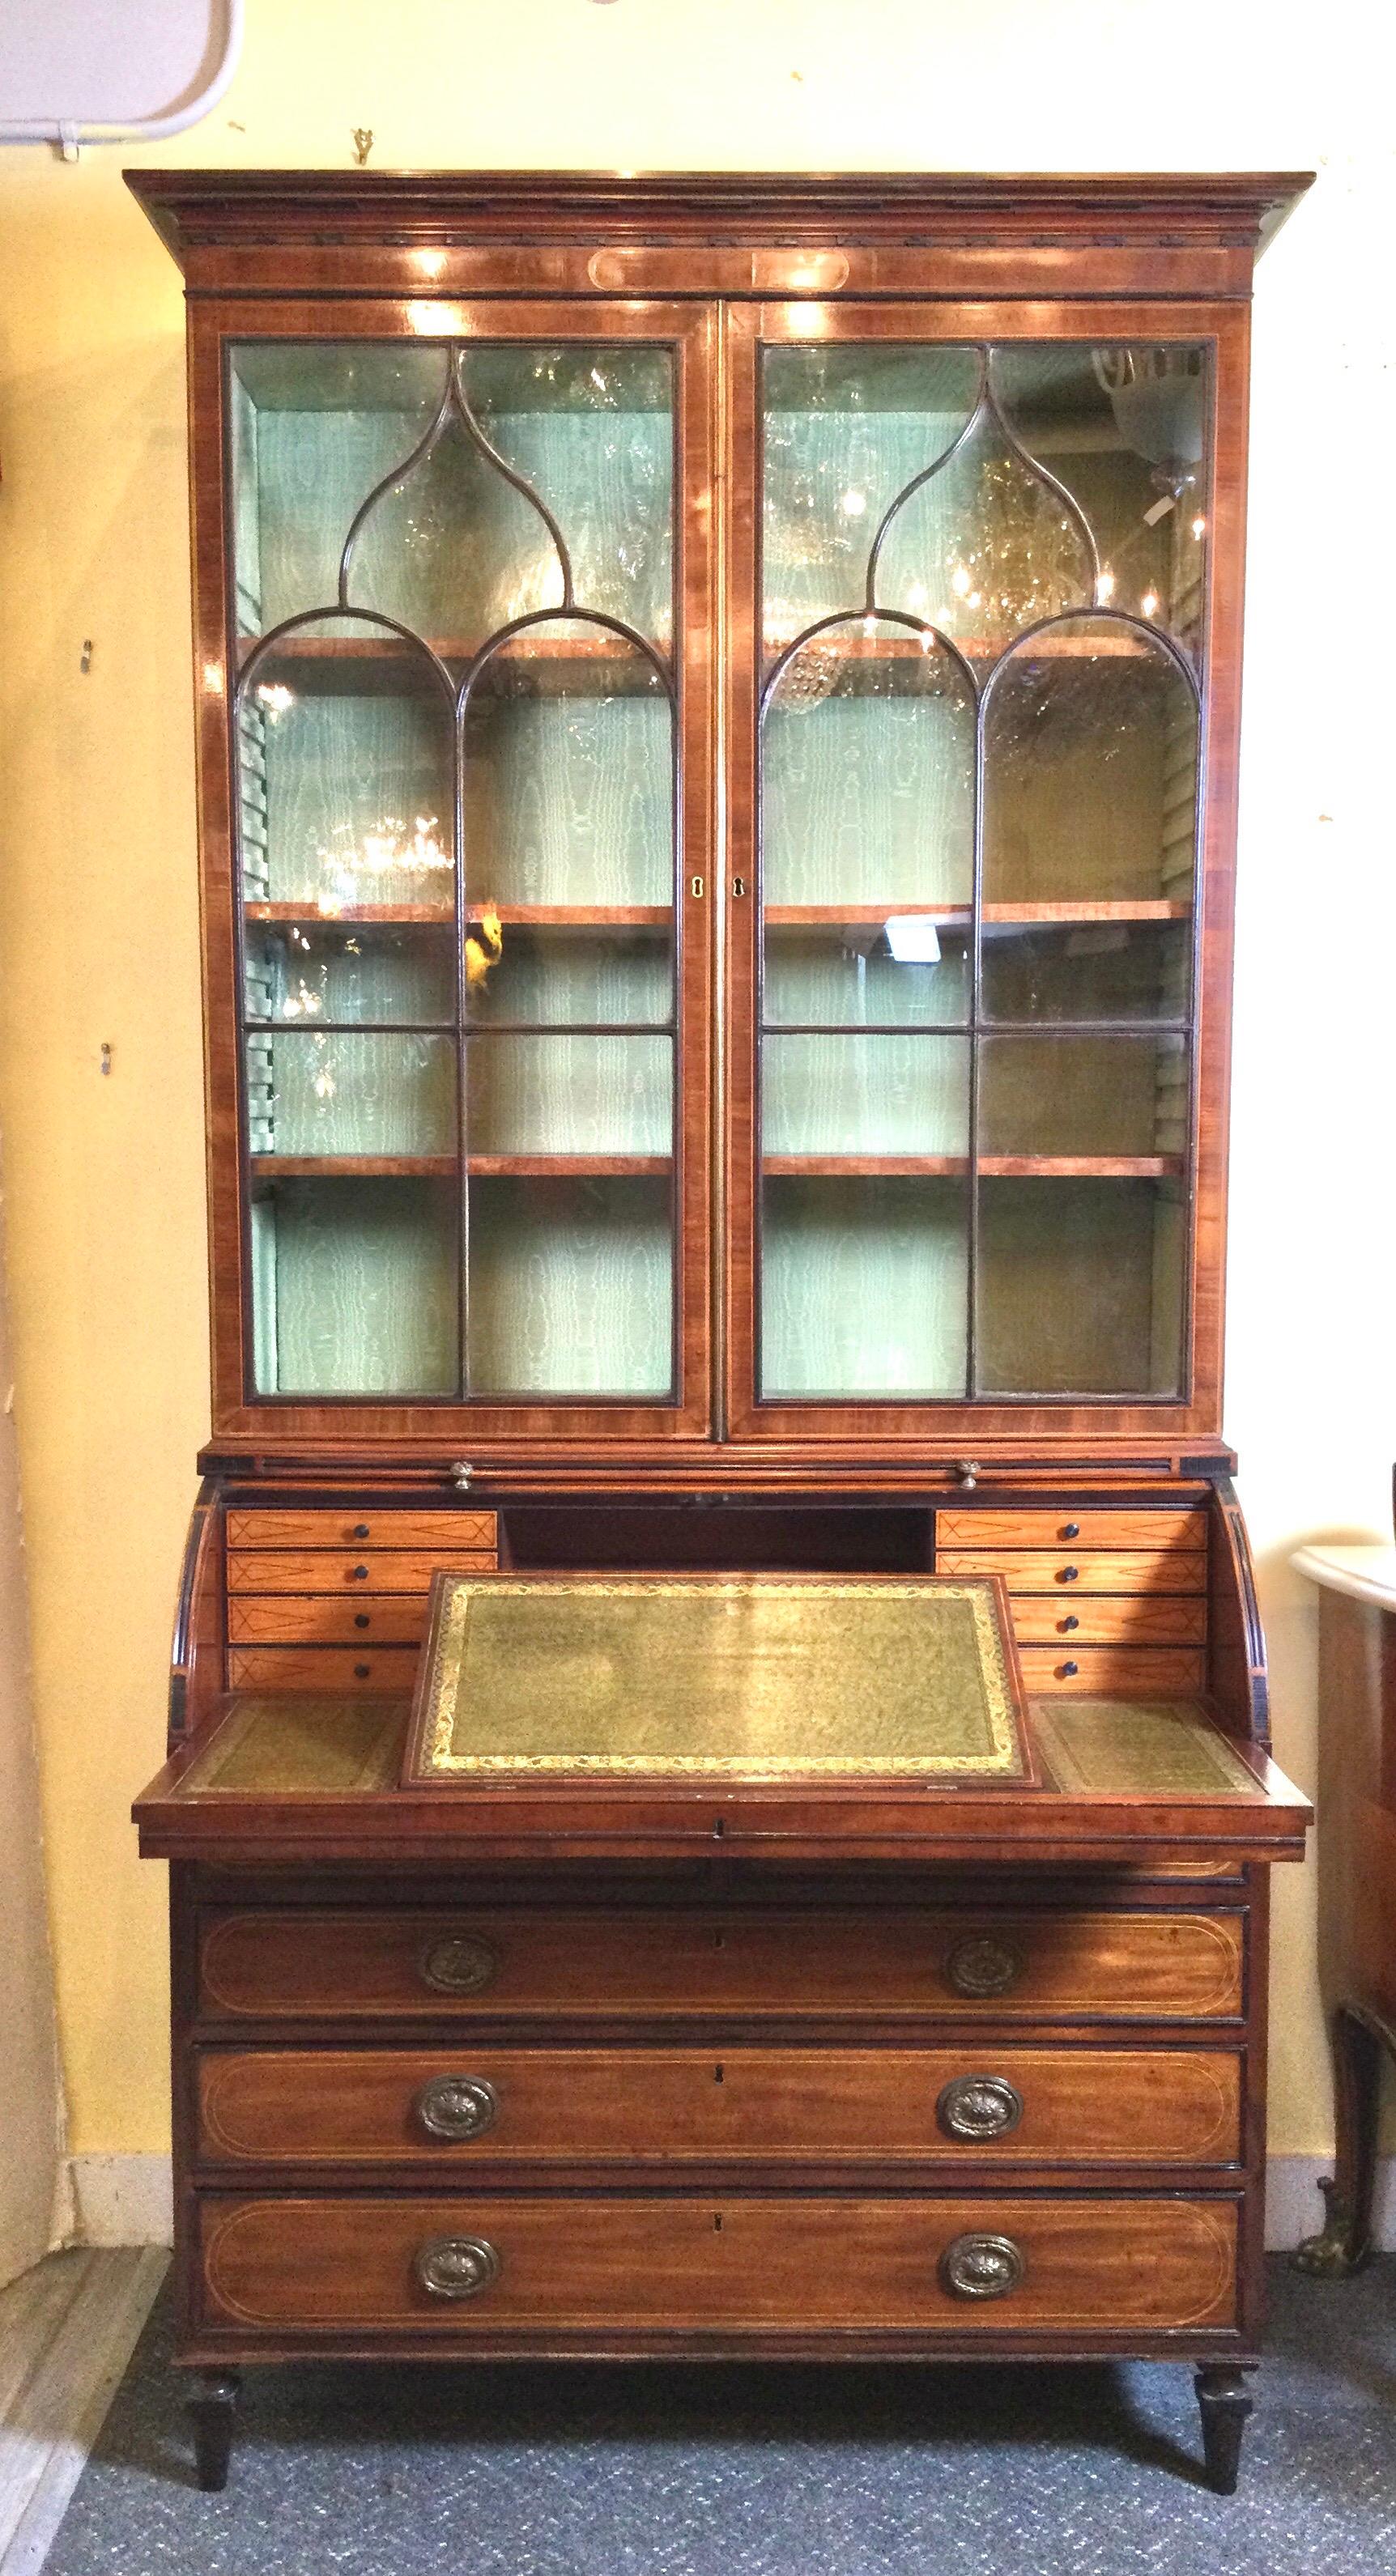 19th Century Edwards and Roberts Antique Inlaid Secretary Desk, 1860-1875, London For Sale